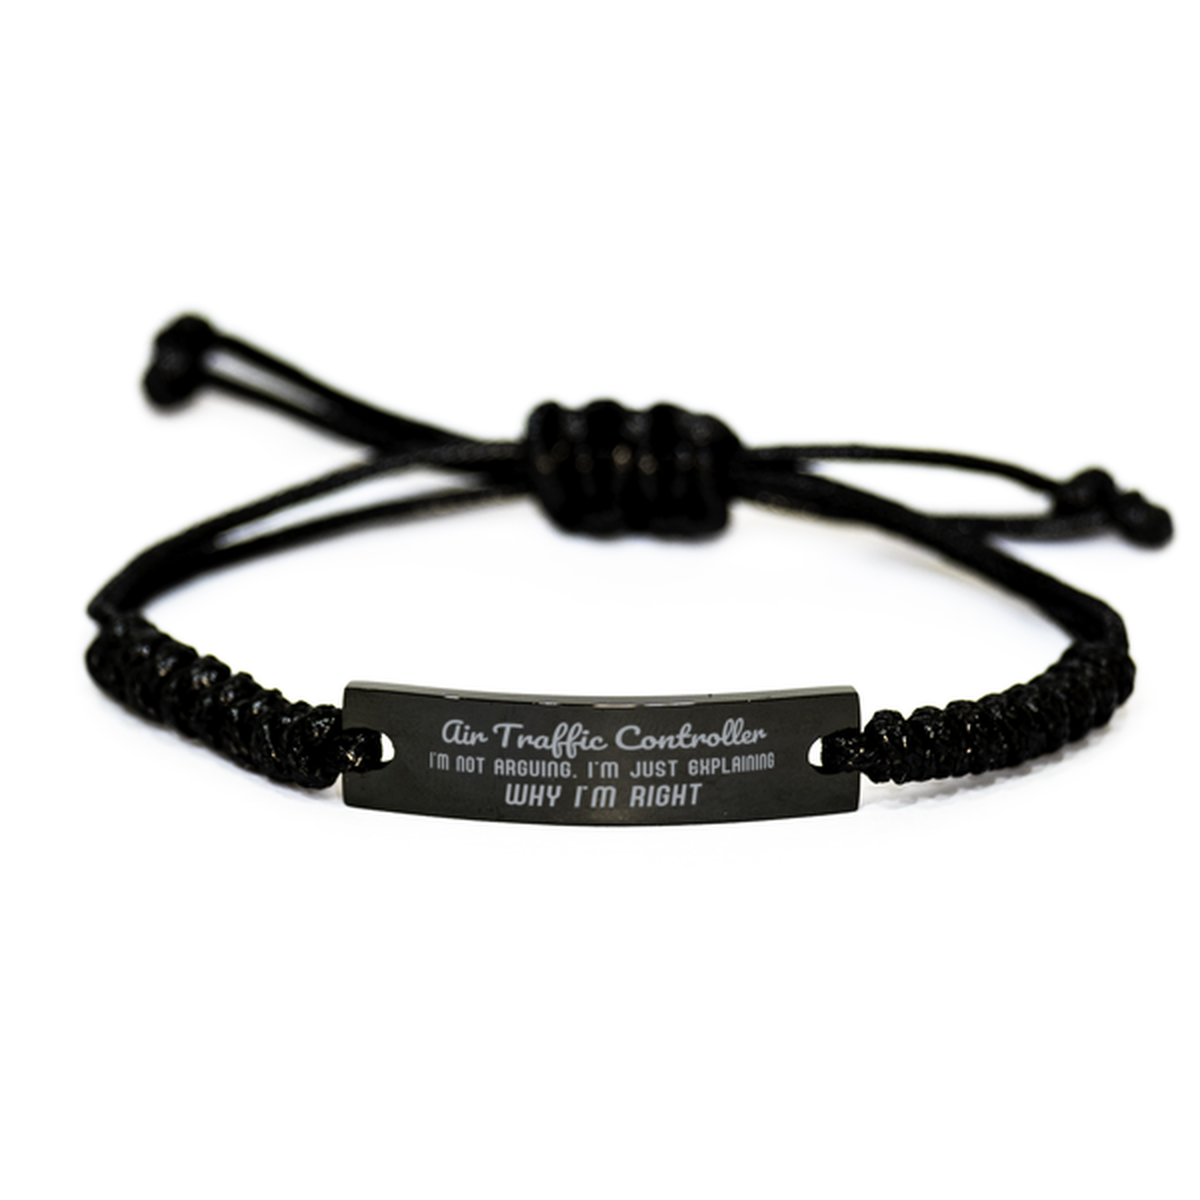 Air Traffic Controller I'm not Arguing. I'm Just Explaining Why I'm RIGHT Black Rope Bracelet, Funny Saying Quote Air Traffic Controller Gifts For Air Traffic Controller Graduation Birthday Christmas Gifts for Men Women Coworker